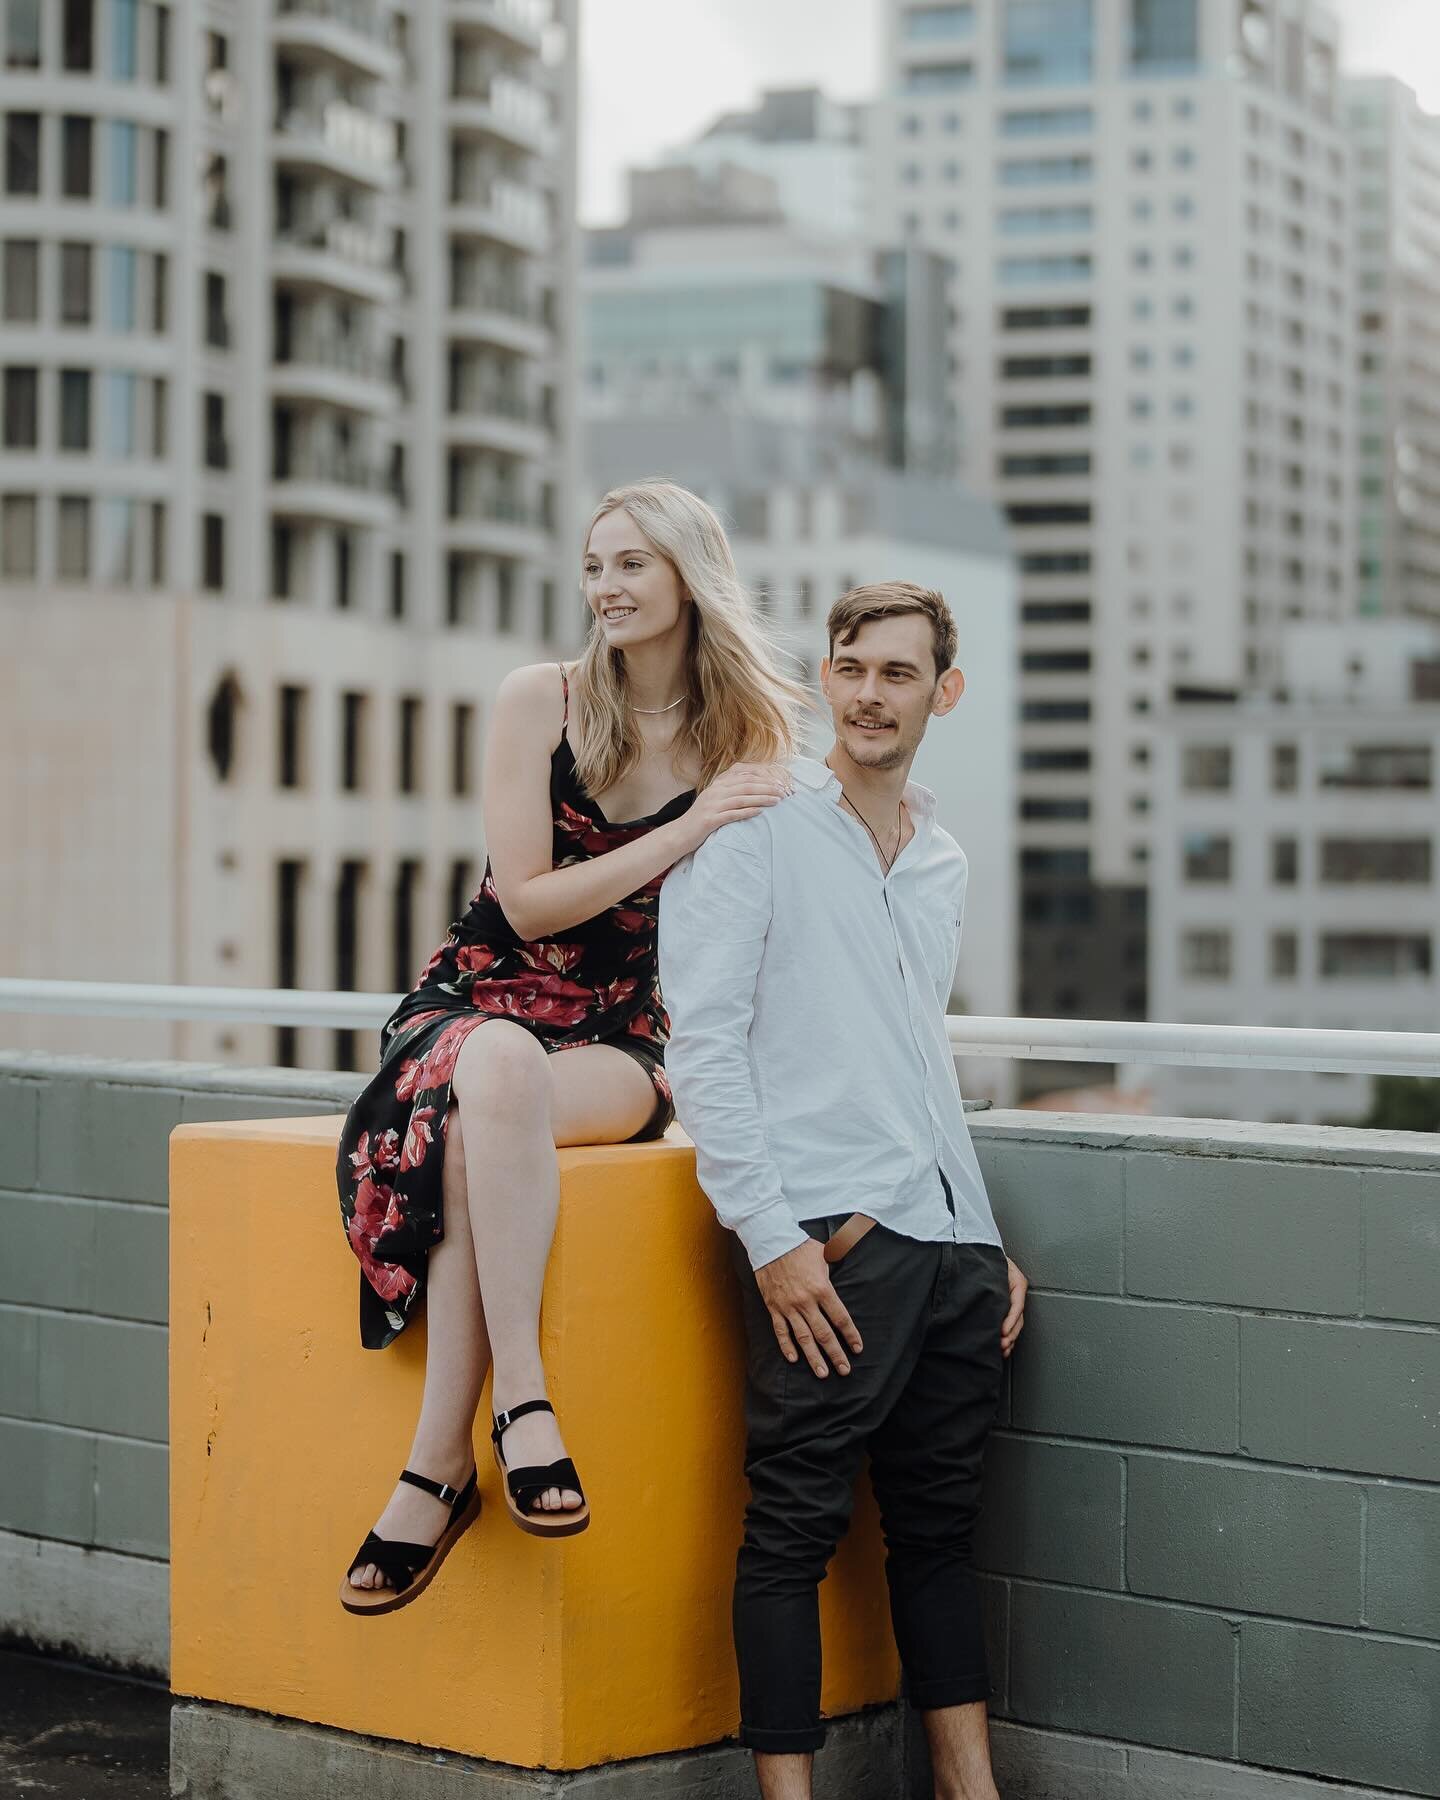 Yesterday was amazing capturing moments with Sam &amp; Bethan in Auckland CBD. We bonded over anime, games, and even had Sam share his knowledge about buildings, which inspired our choice of a building backdrop. Also, who can resist good ramen? 🍜 Ca